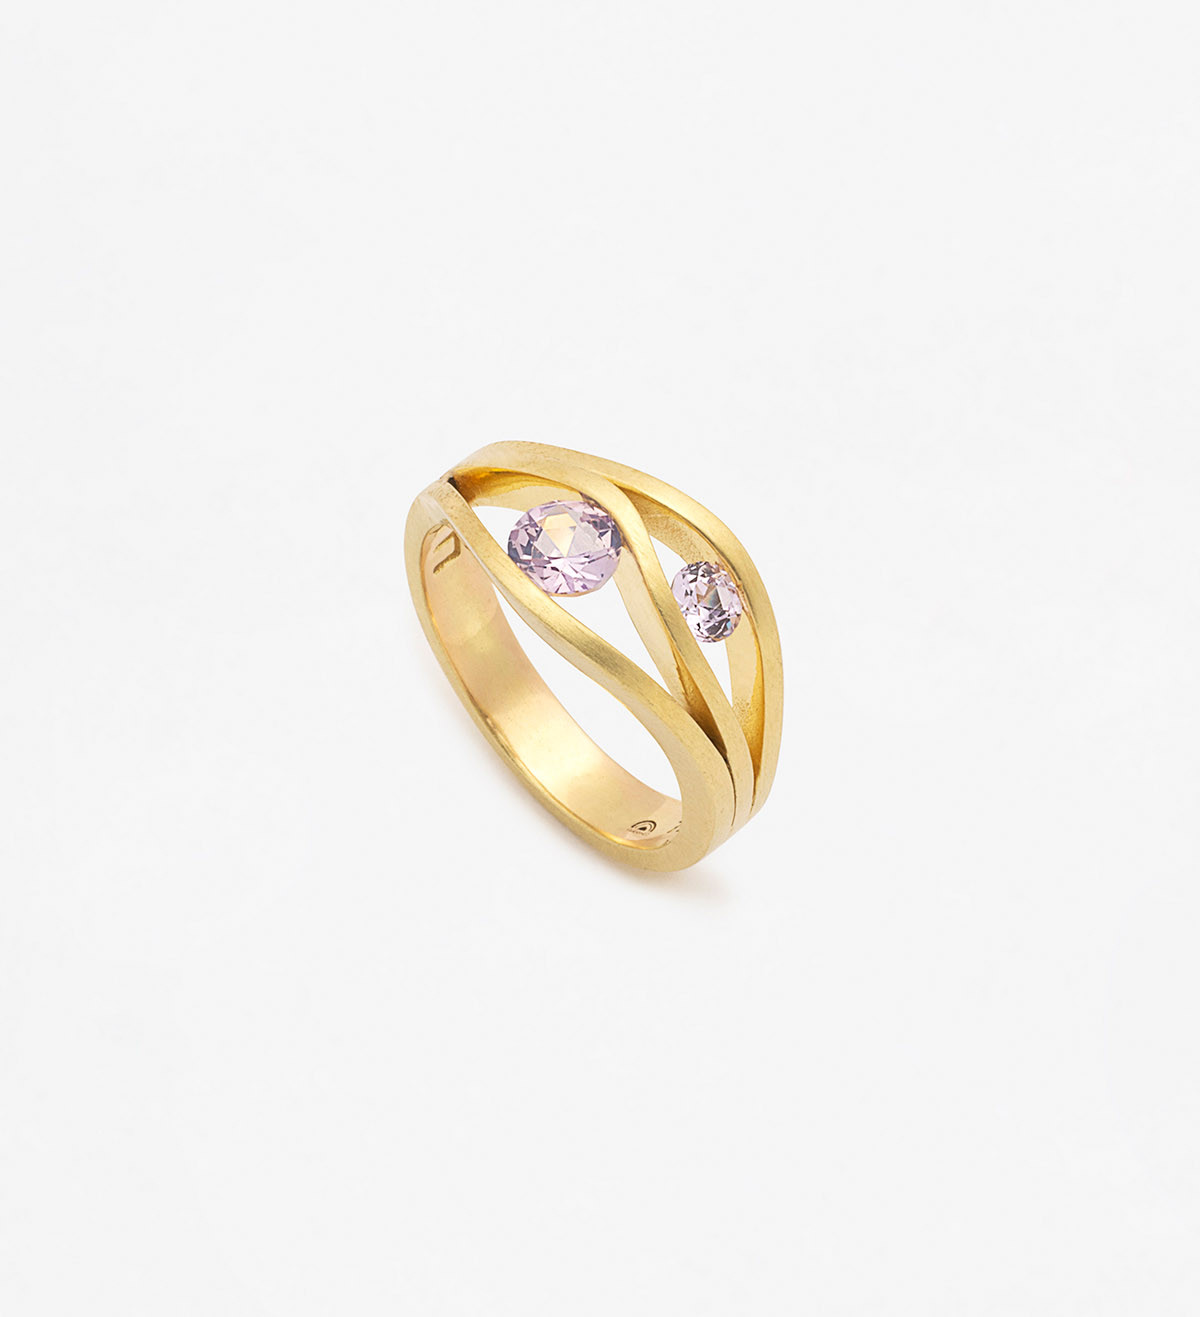 18k gold ring with lila Wennick-Lefèvre sapphires 0,58ct